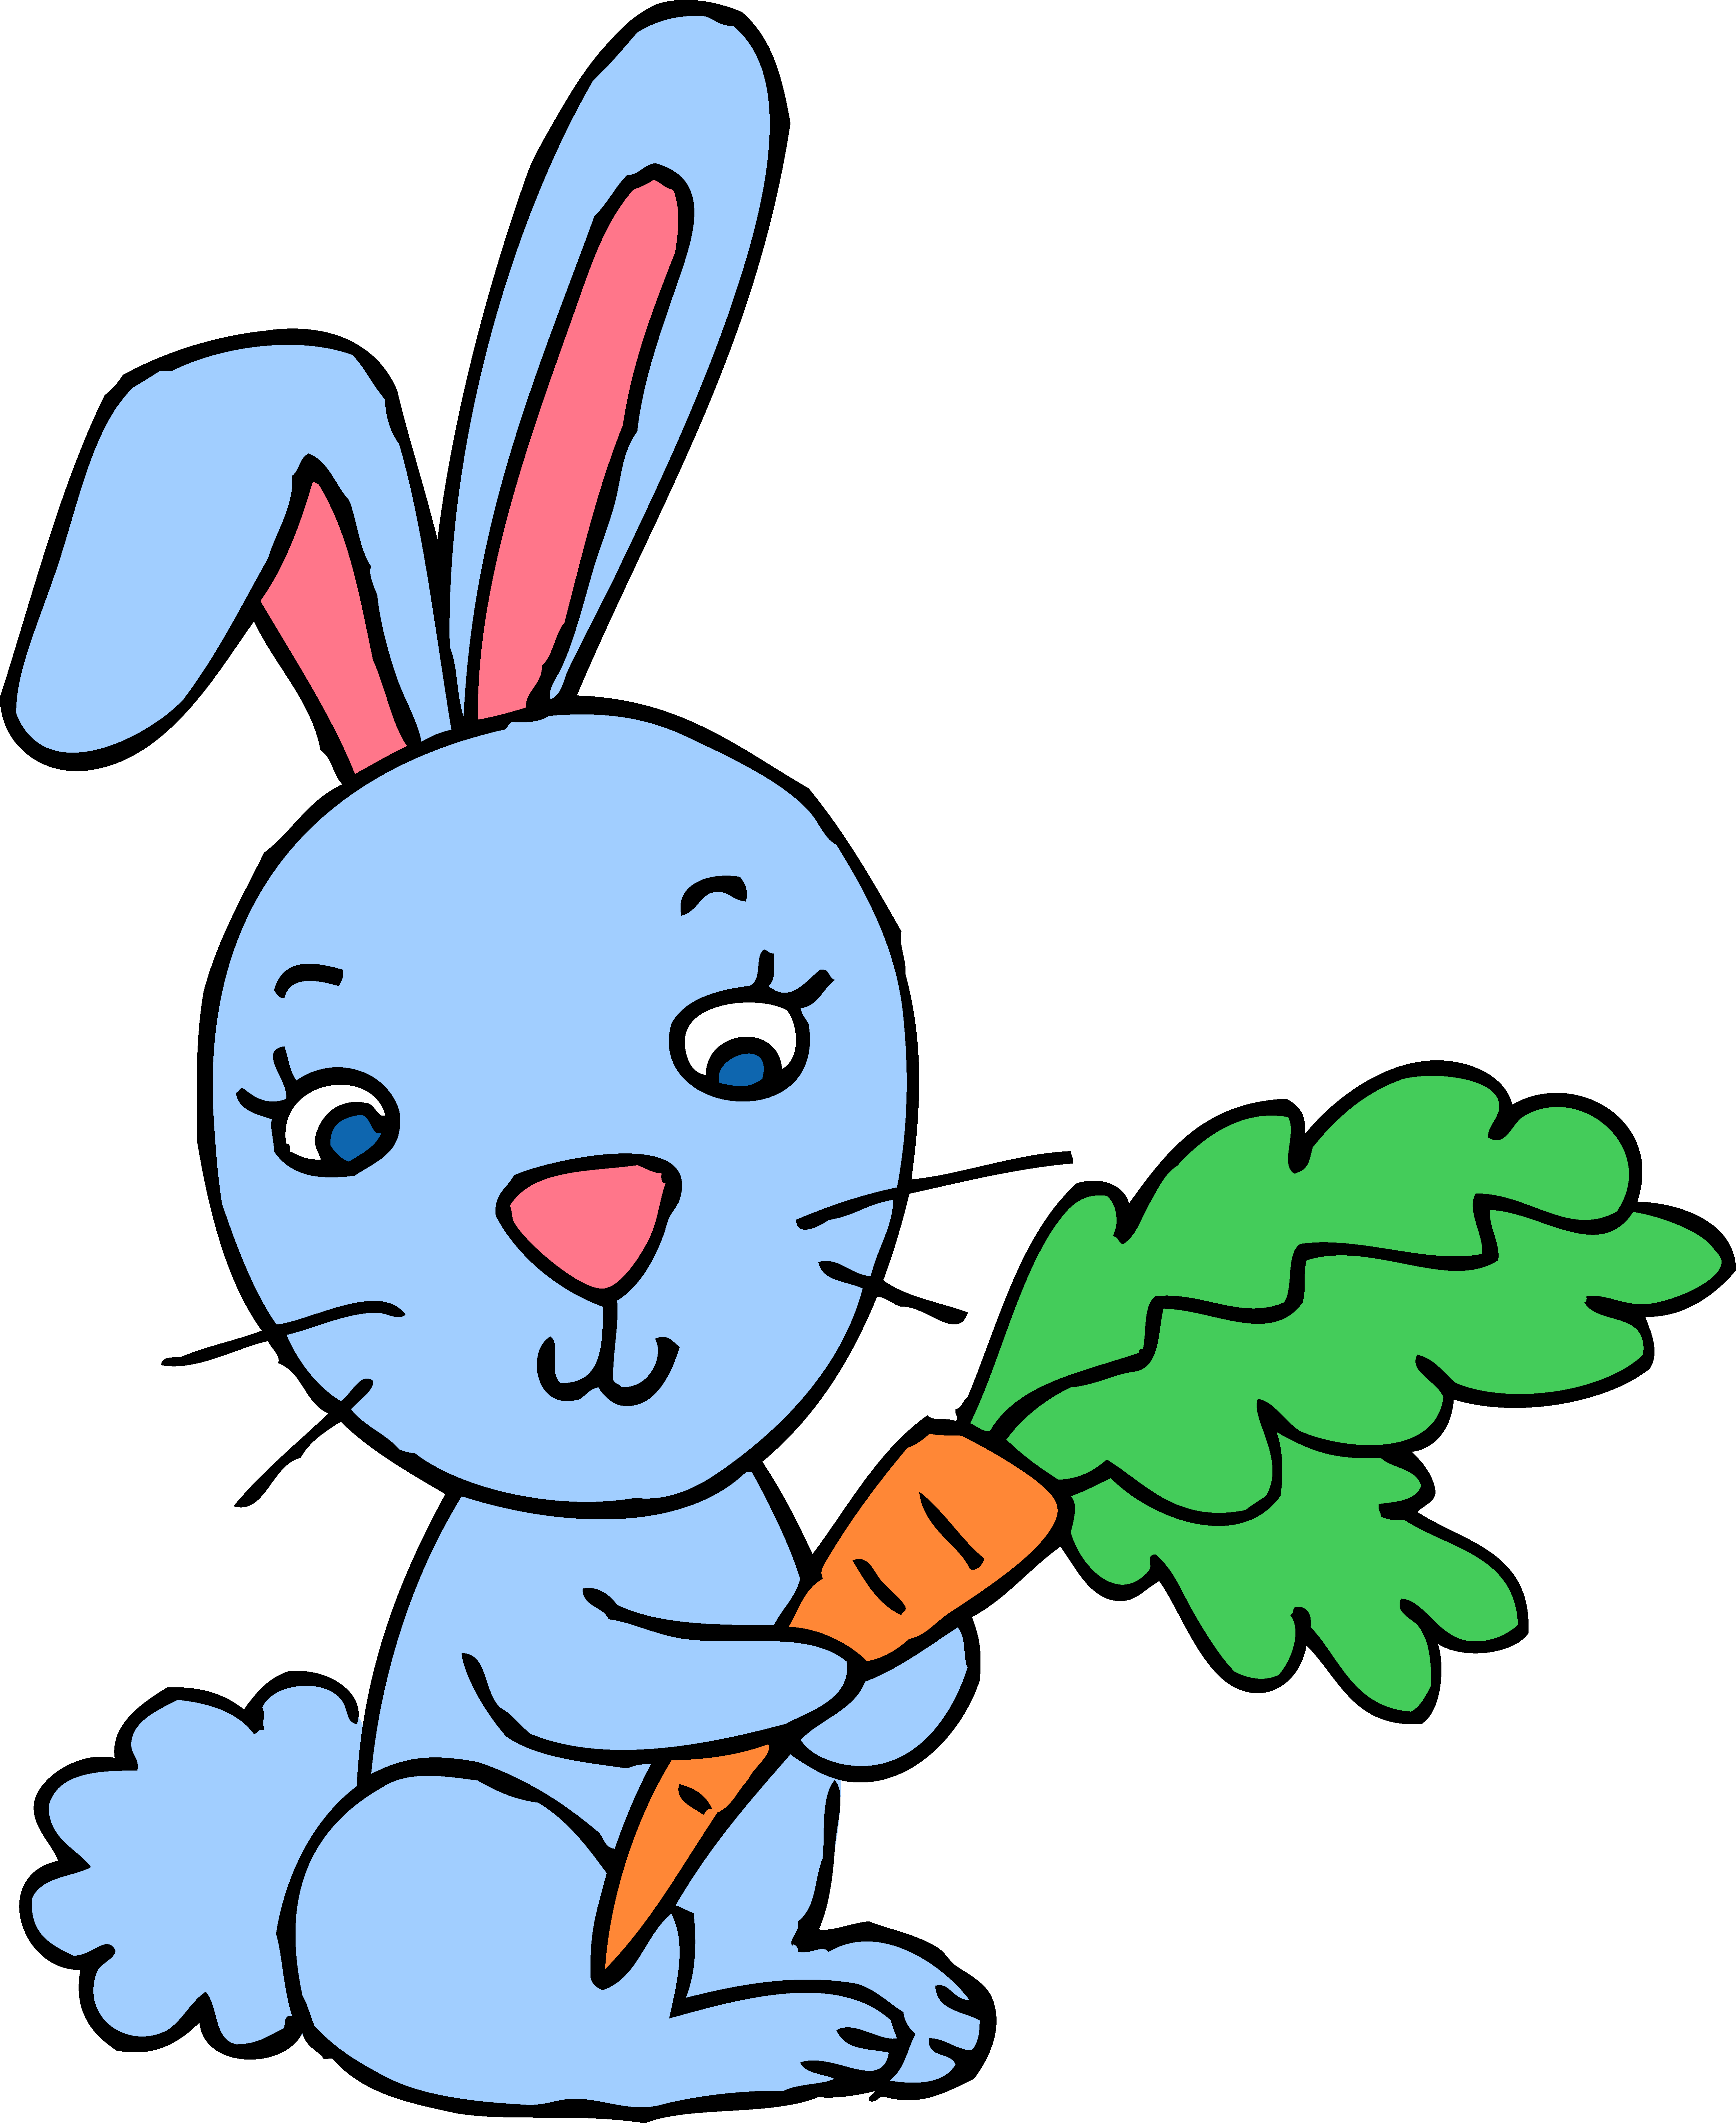 Blue Bunny Rabbit With Carrot - Free Clip Art